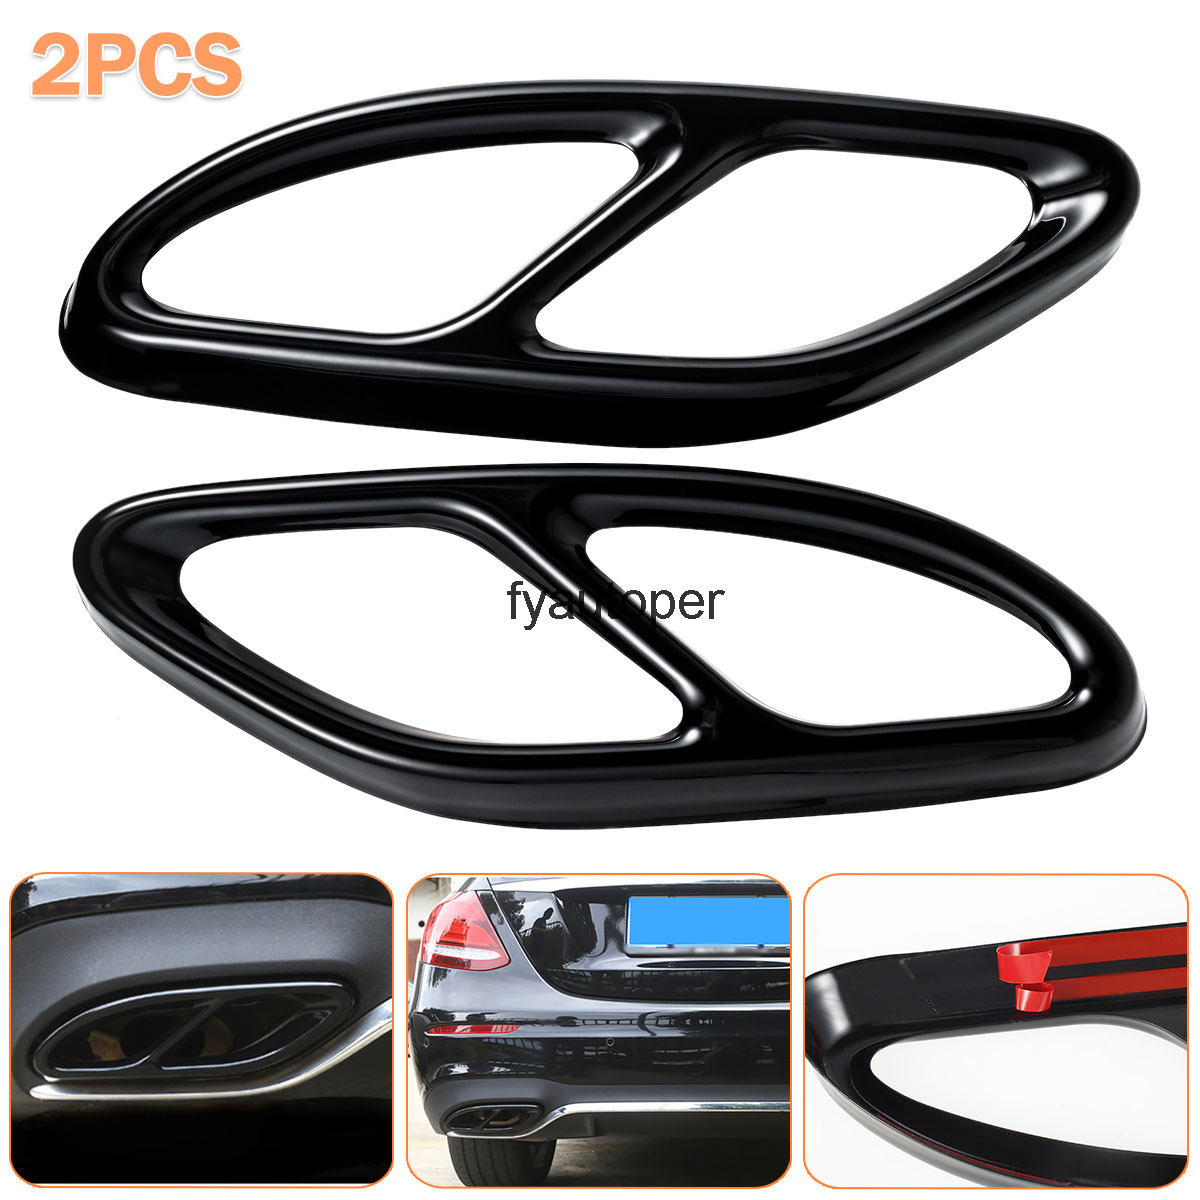 2pcs Car Styling Tail Throat Frame Decoration Cover Trim For 2015-2017 Mercedes-Benz Exhaust Pipe Stickers Accessories от DHgate WW